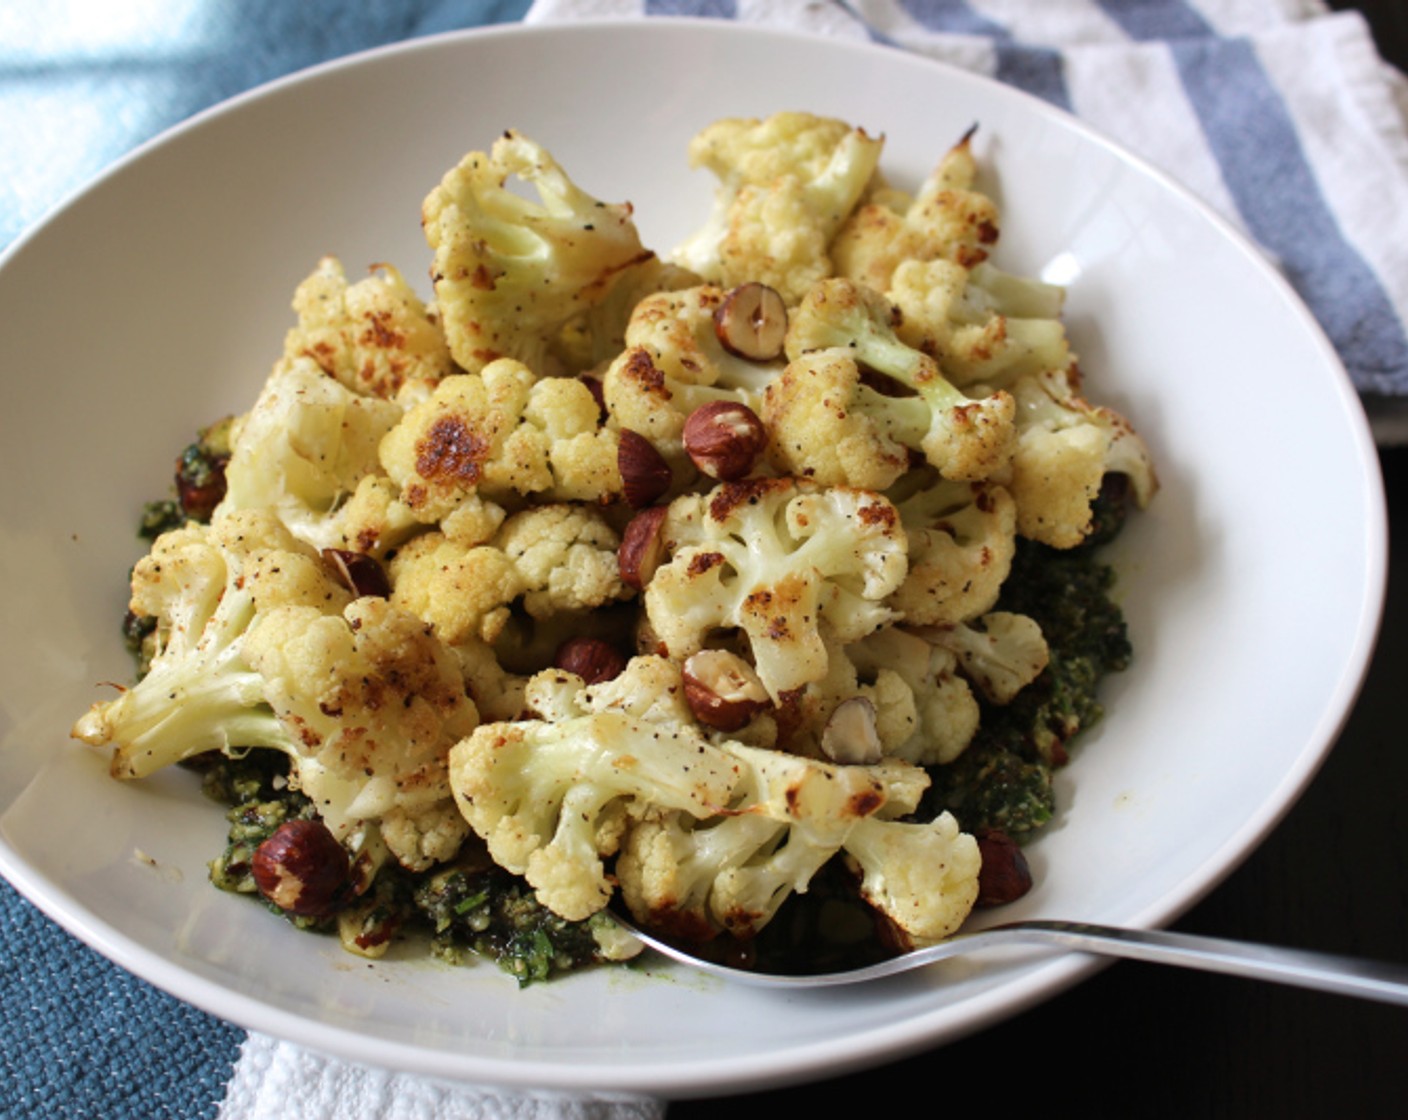 step 7 Spread pesto on a serving platter and spoon the cauliflower on top. Serve hot. Enjoy!